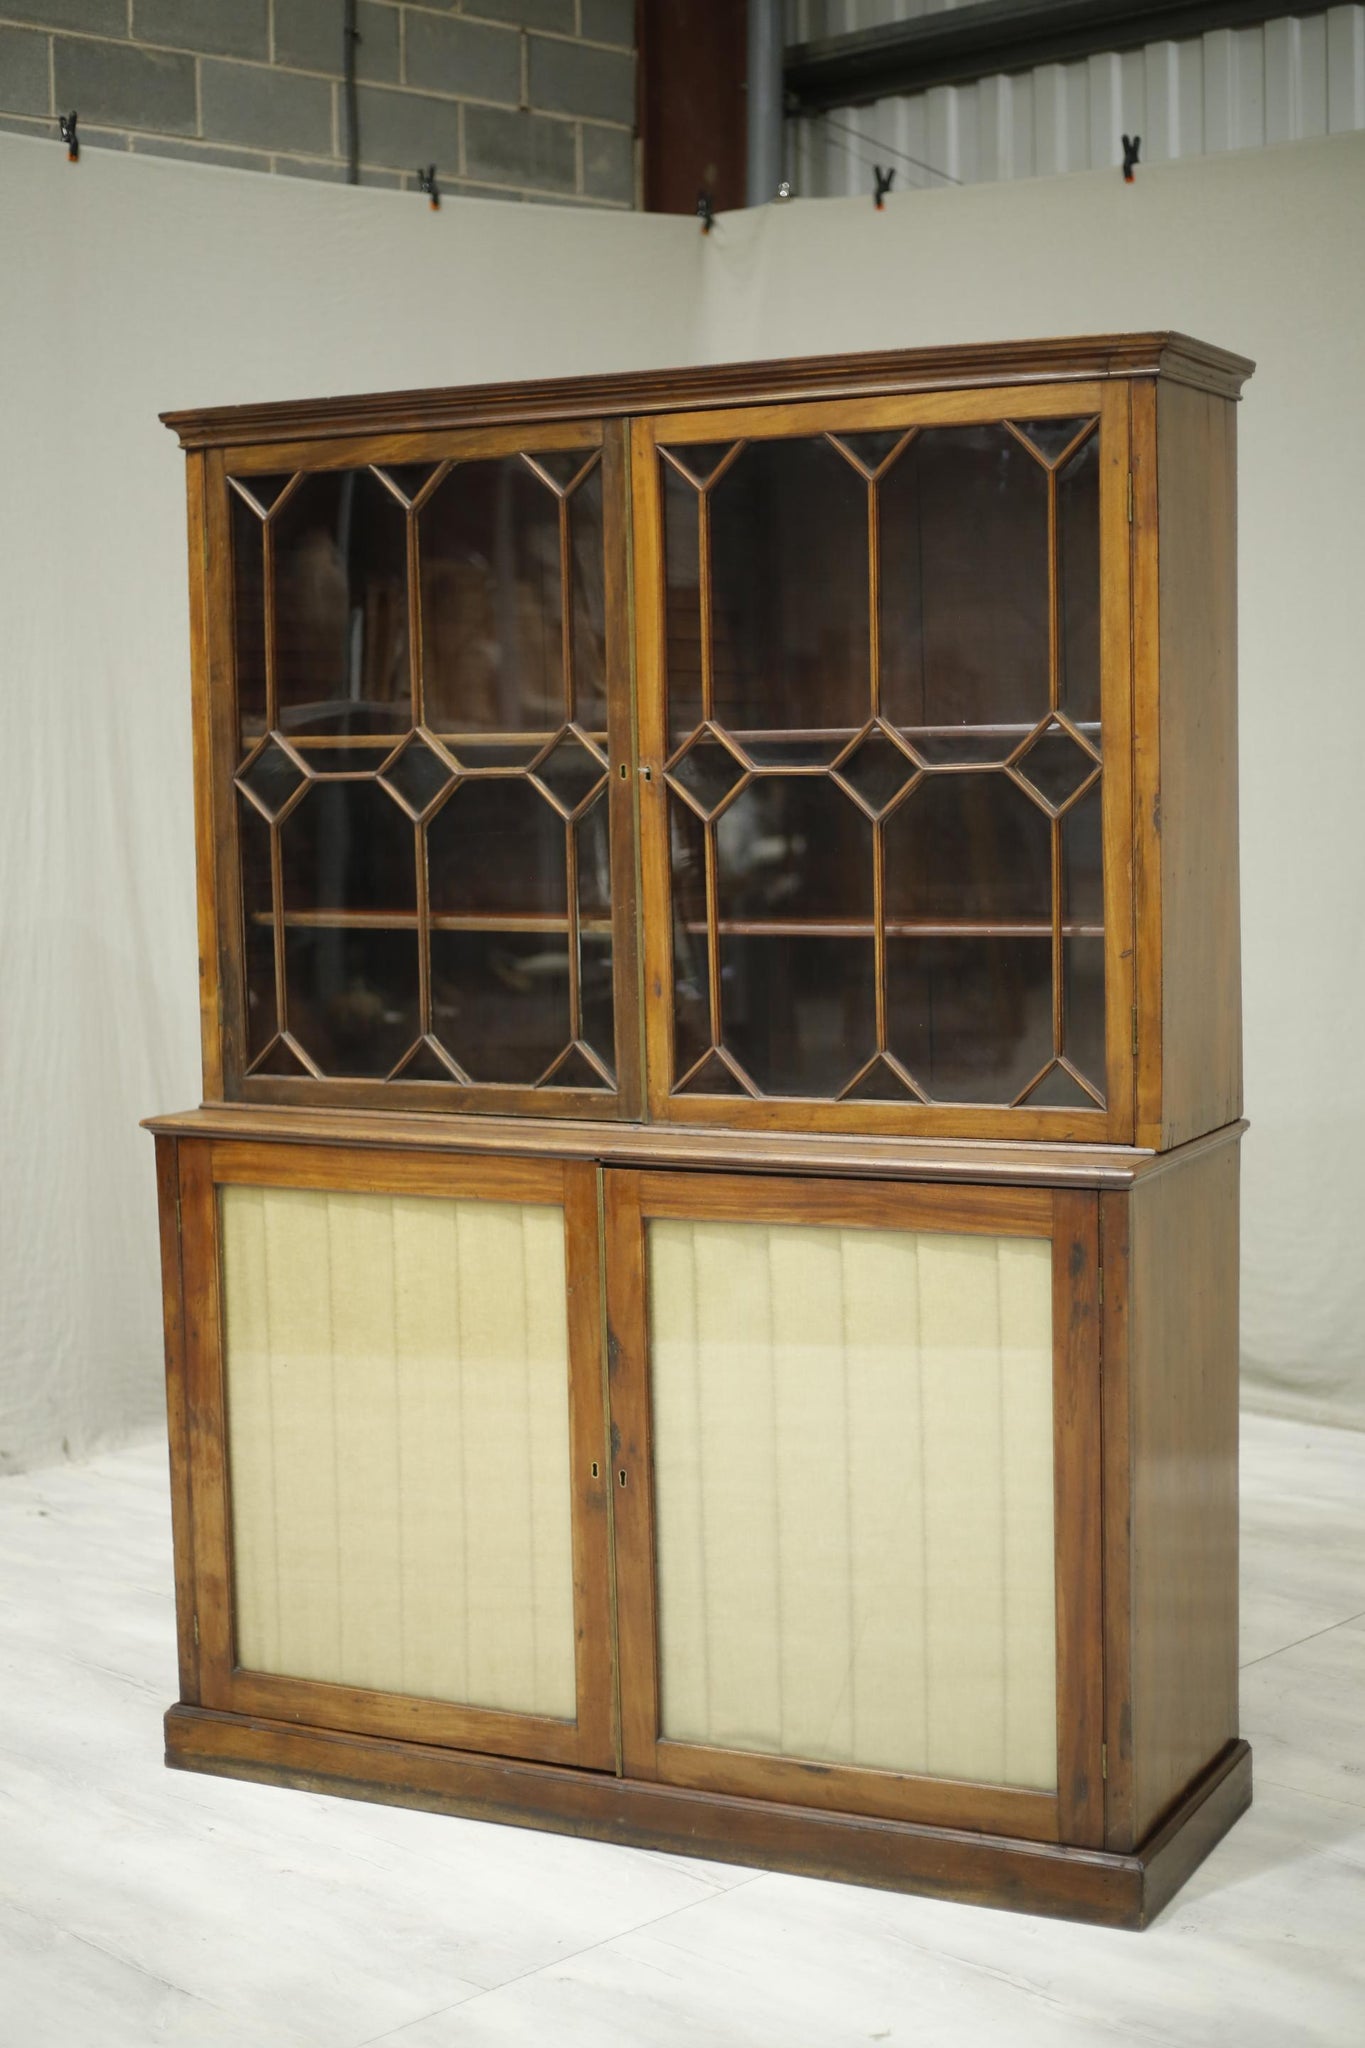 Antique Georgian mahogany glazed cabinet with material doors